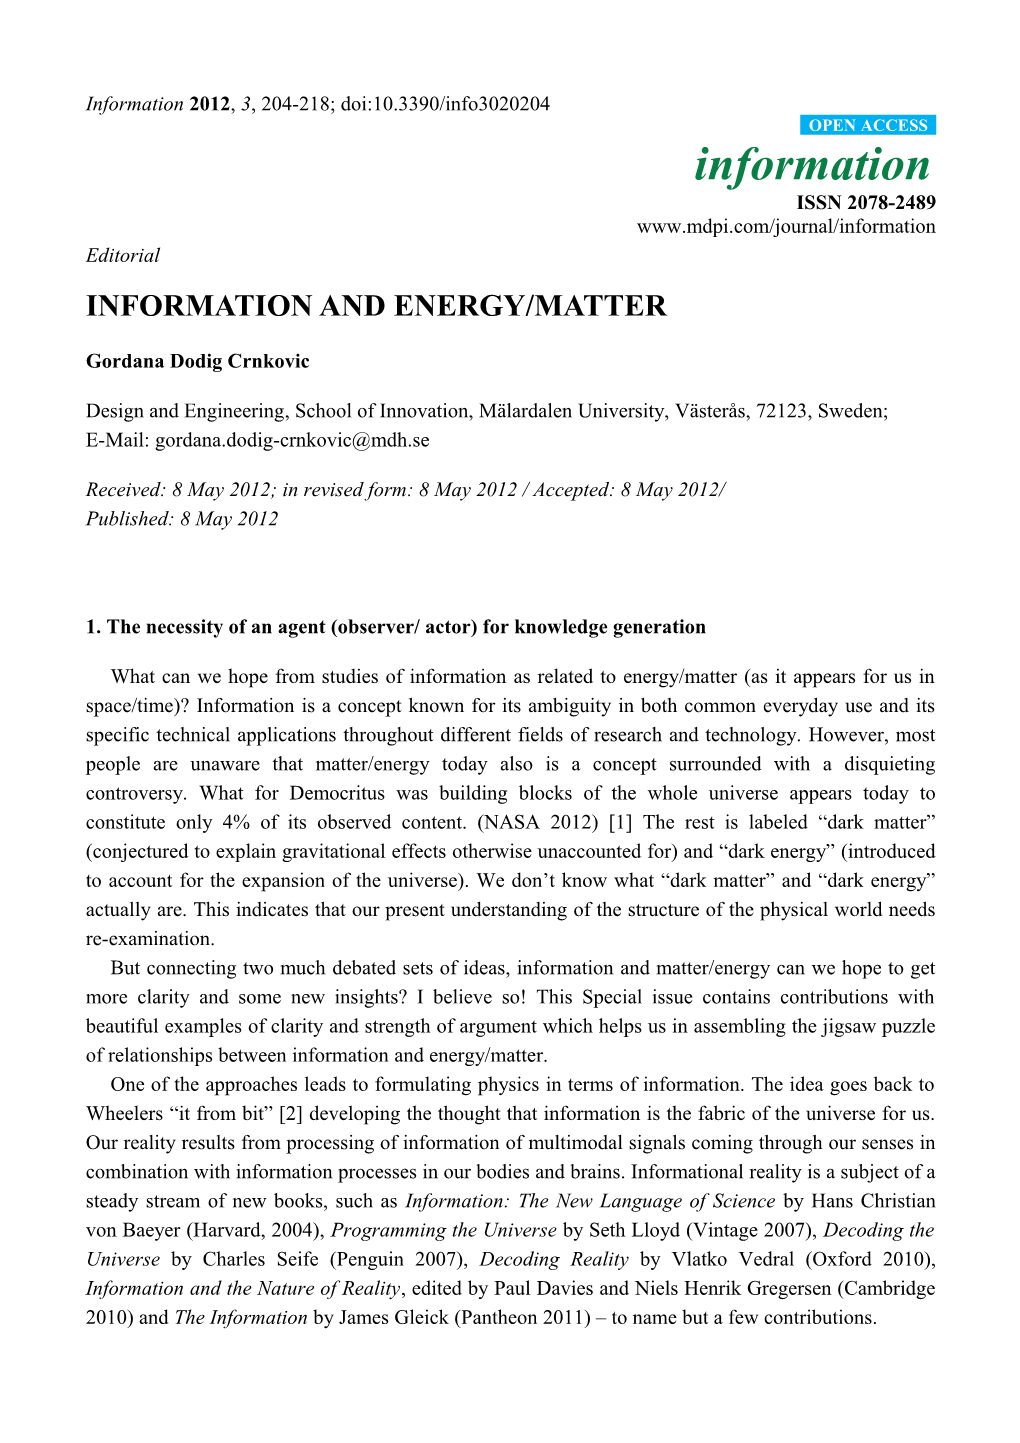 Information and Energy/Matter